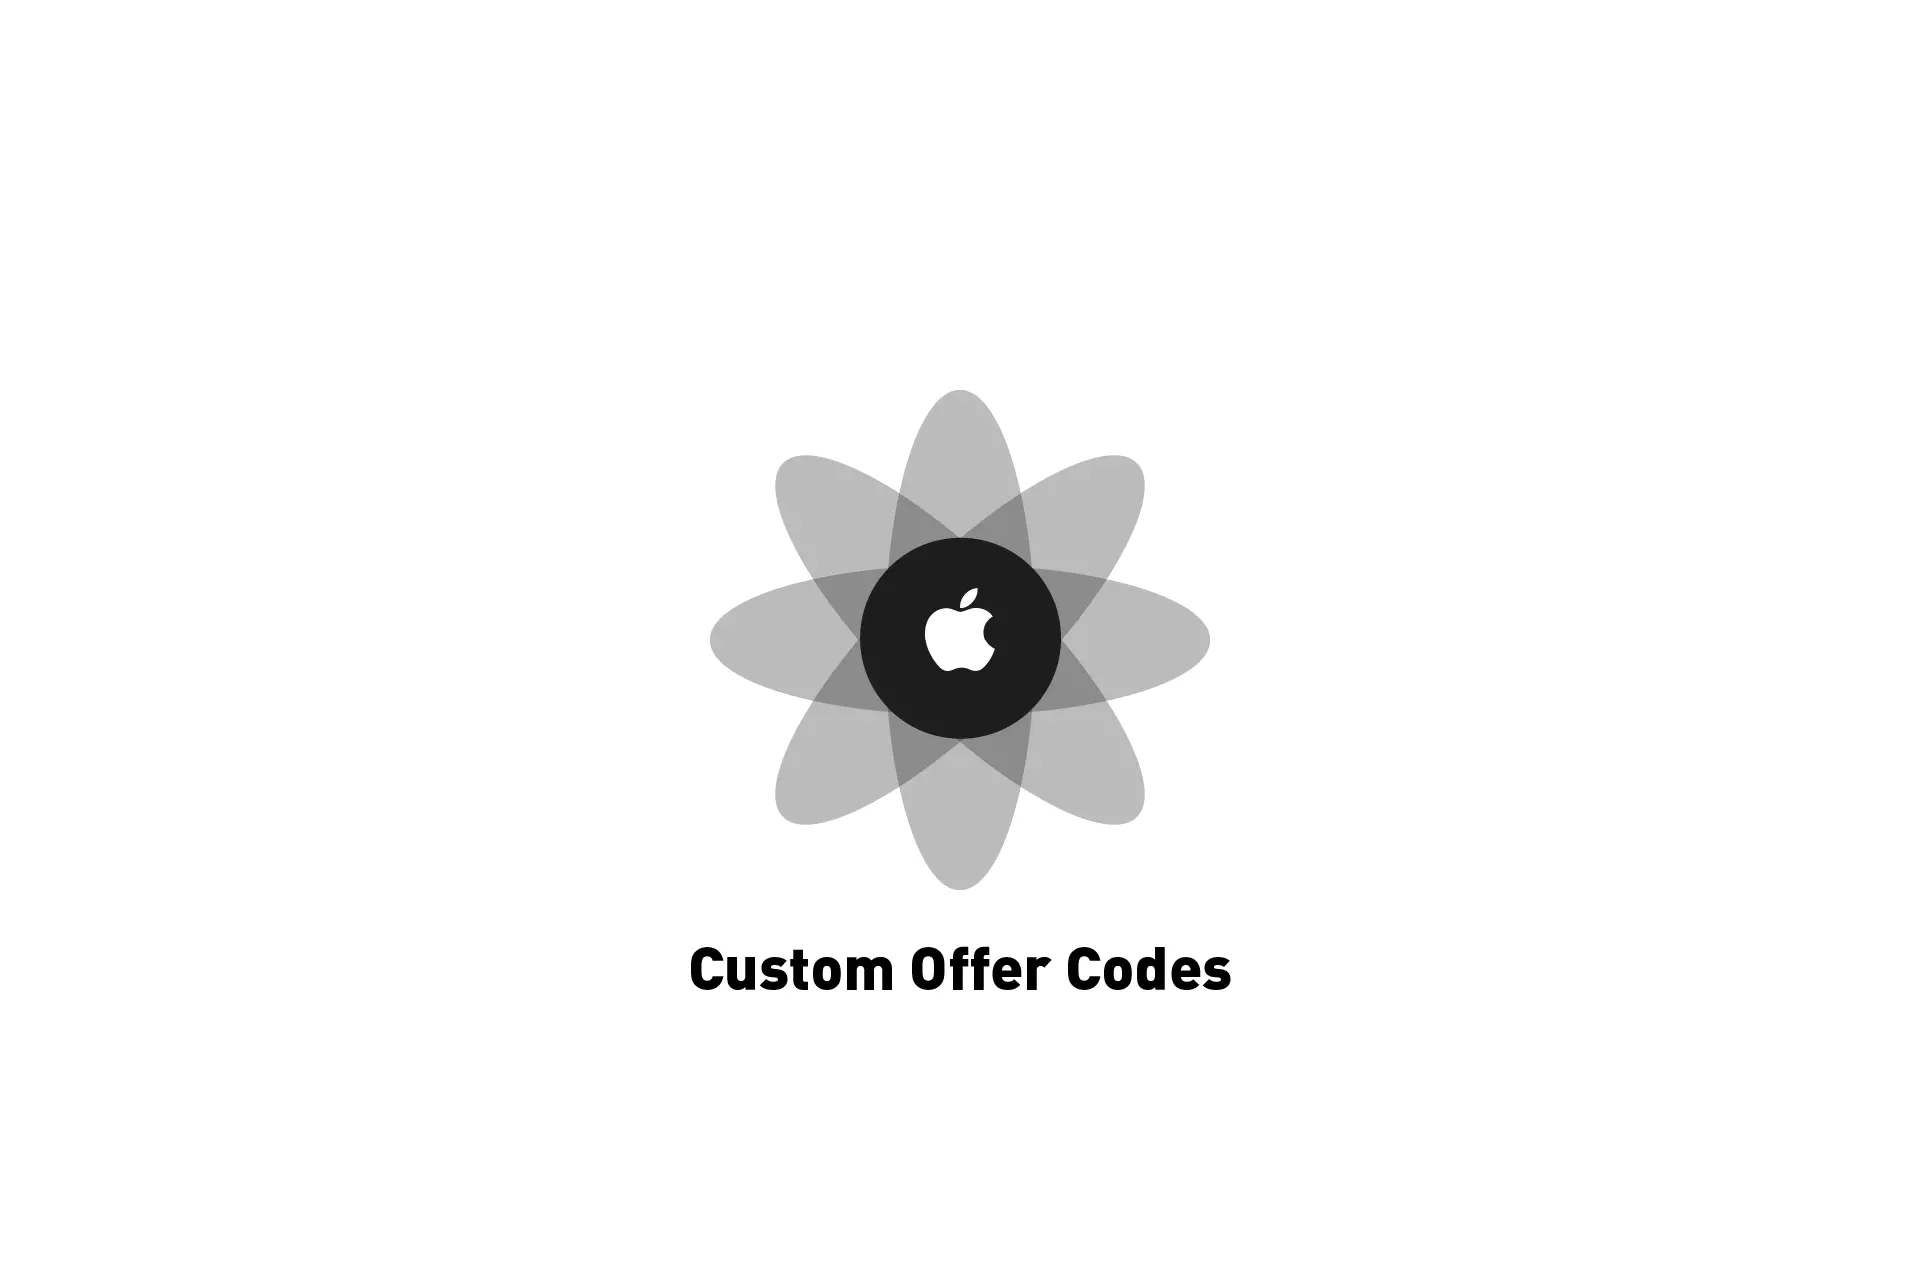 A flower that represents Apple with the text "Custom Offer Codes" beneath it.